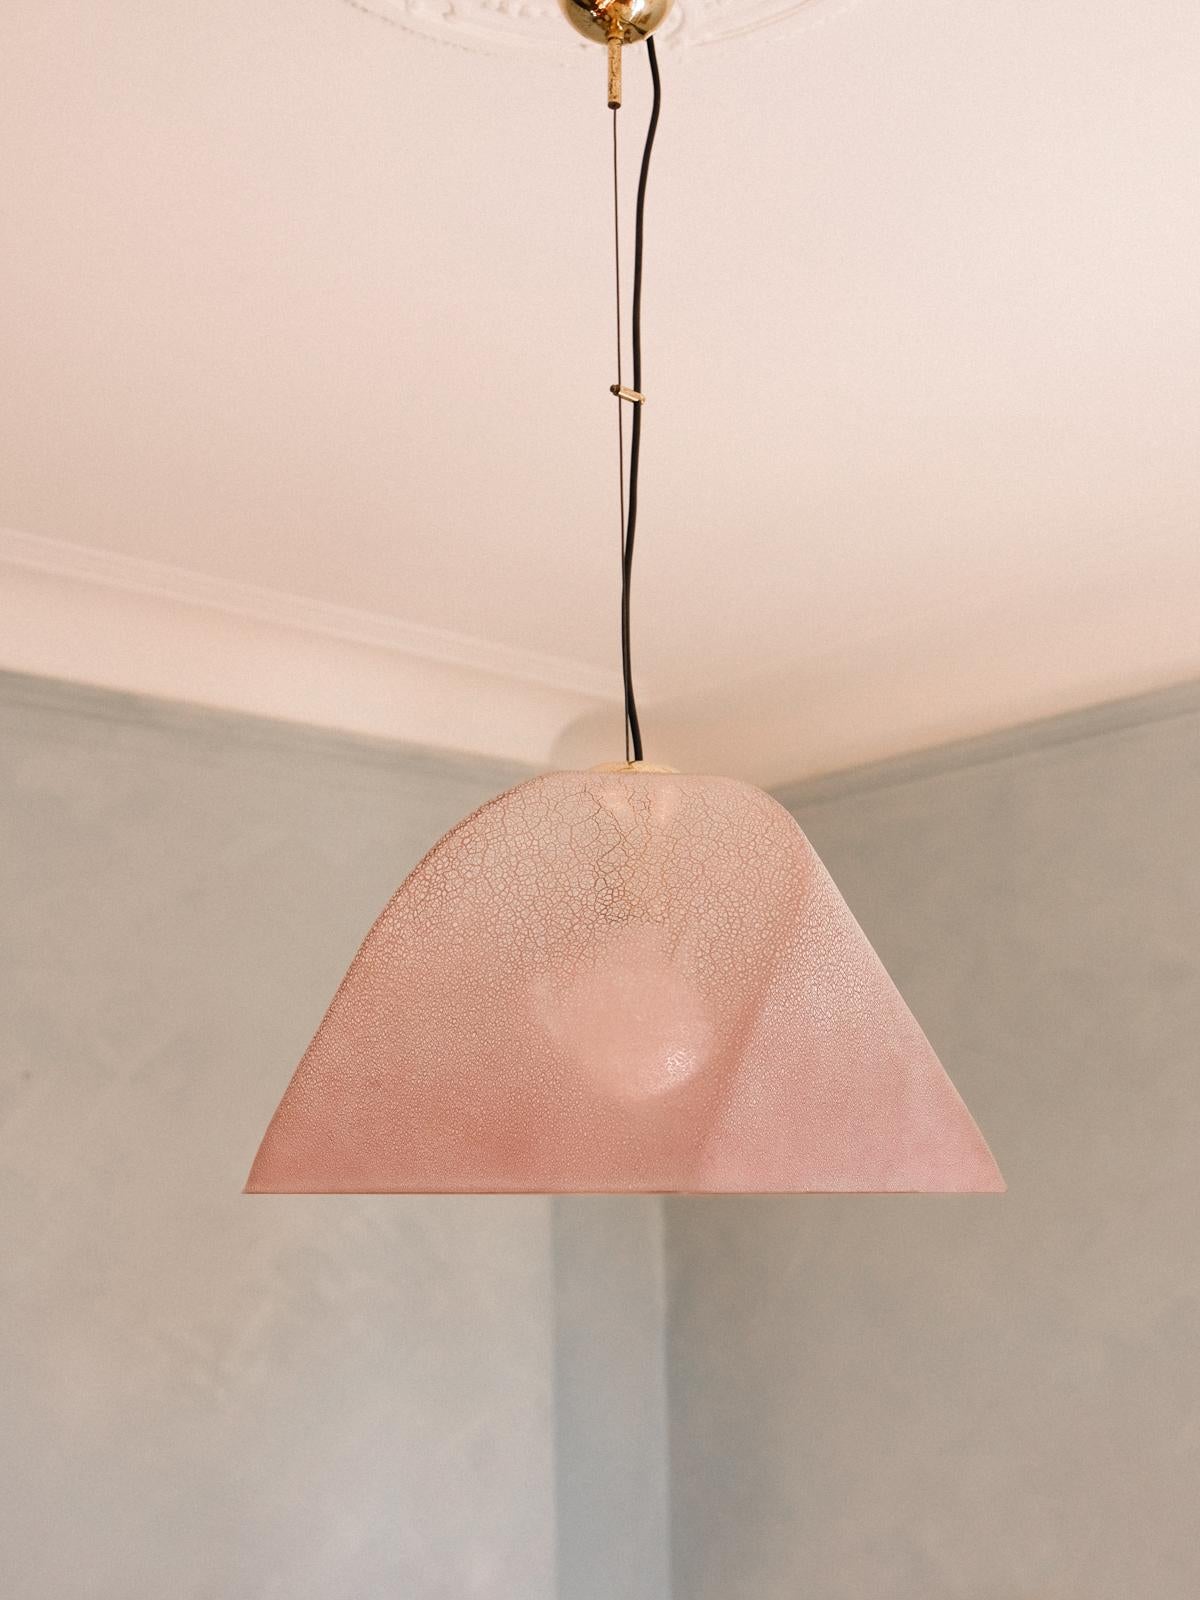 Murano glass hanging lamp in a pinkish crackled colour by master glassblower Alfredo Barbini, circa 1960, signed 